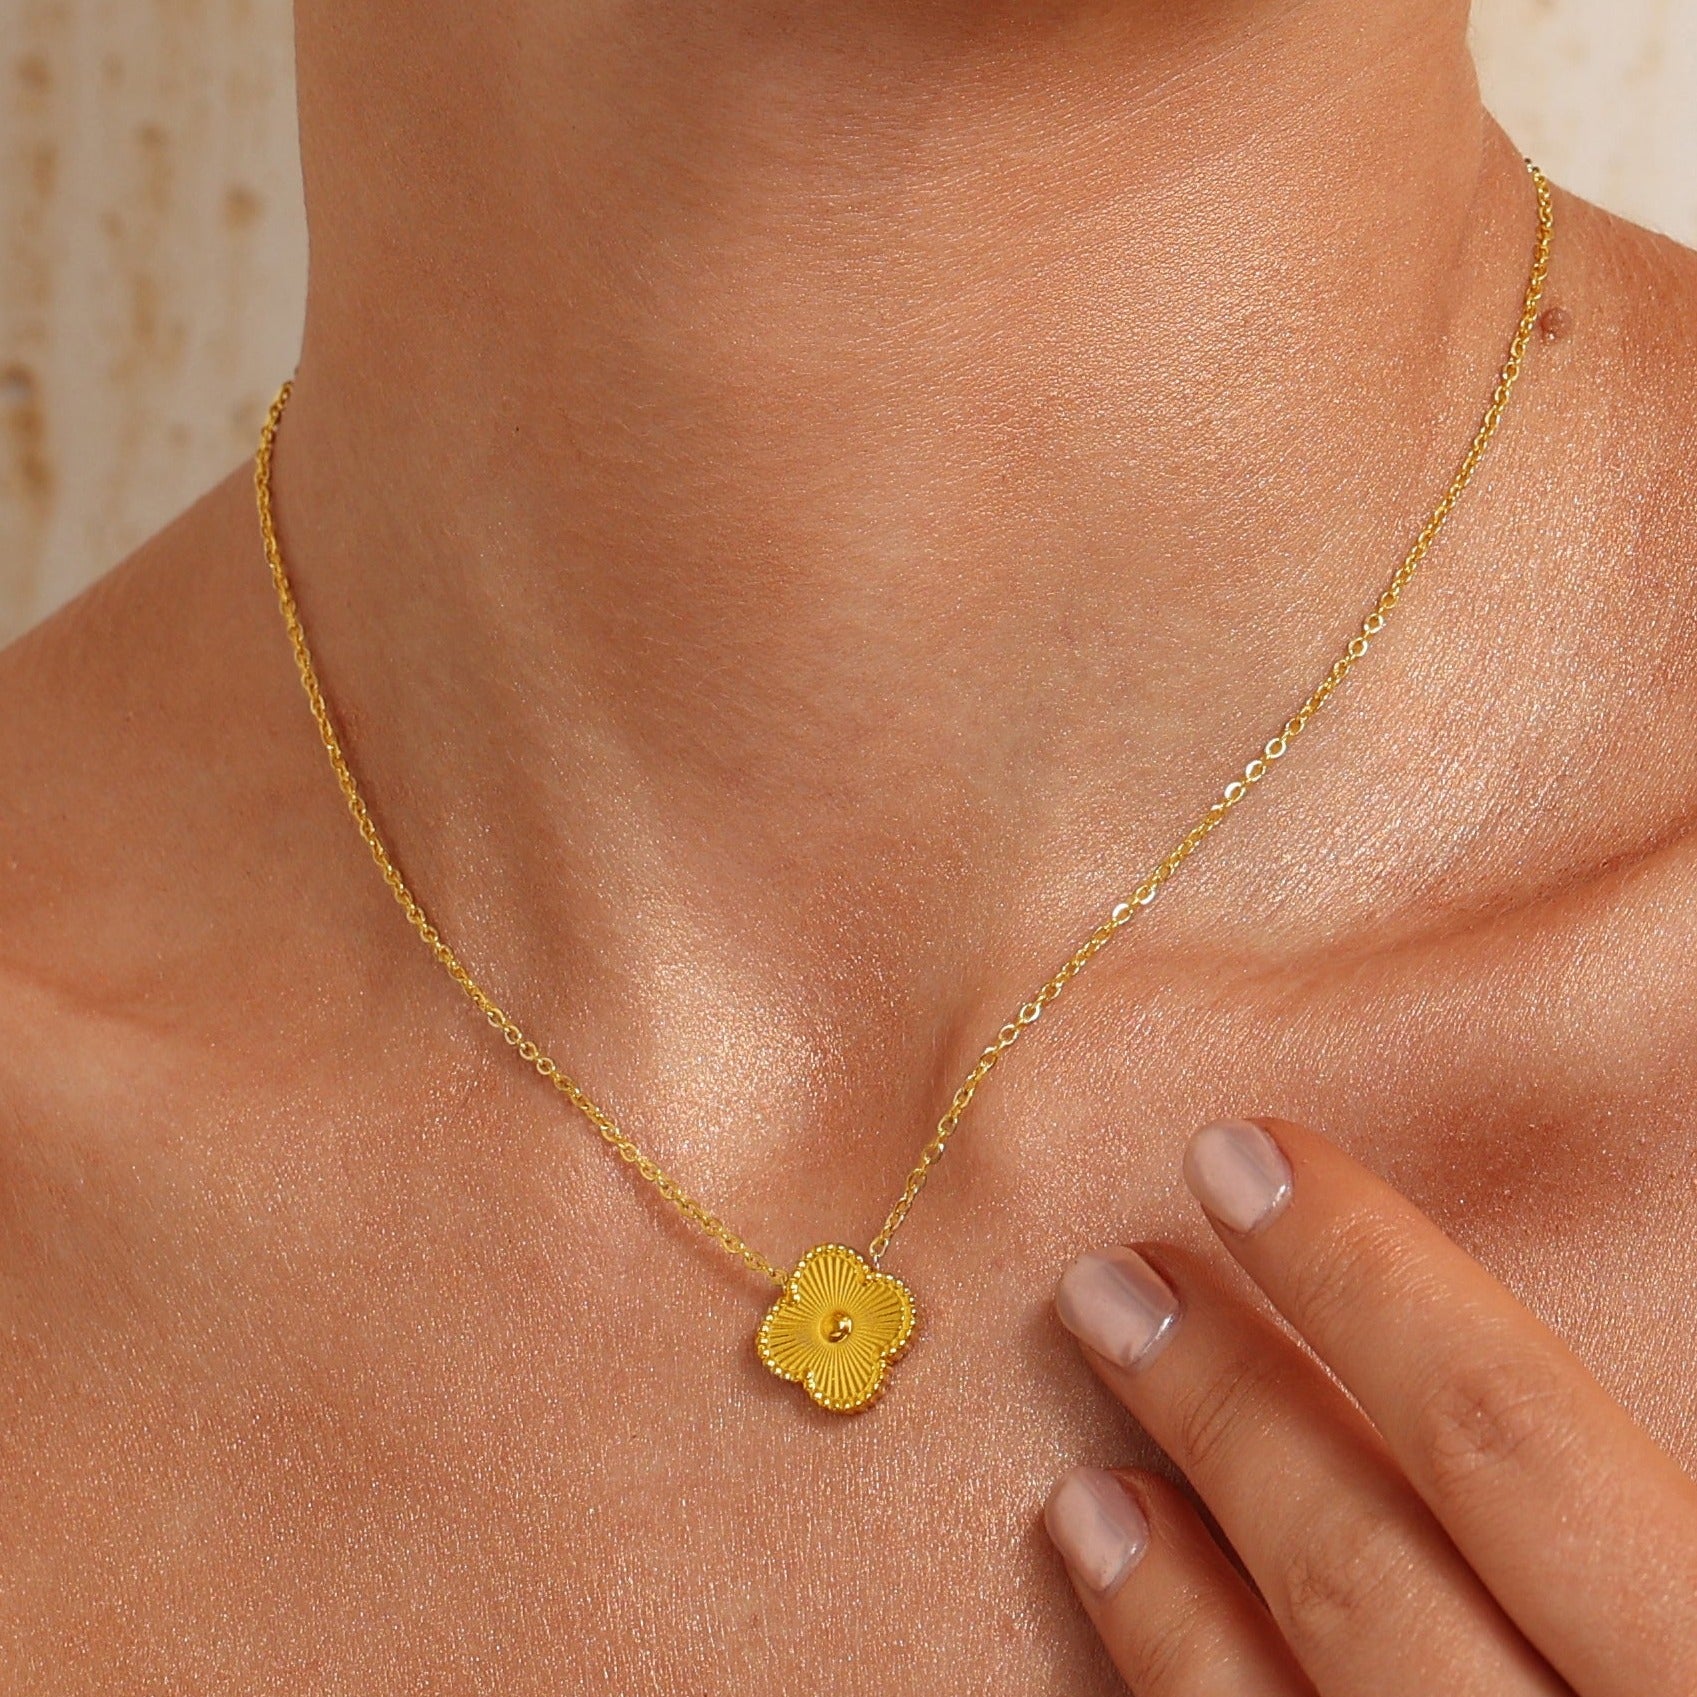 Clover Pendant Necklace - 18K Gold Plated - Waterproof - Tarnish-free -  Hypoallergenic - Stainless Steel / Surgical Steel